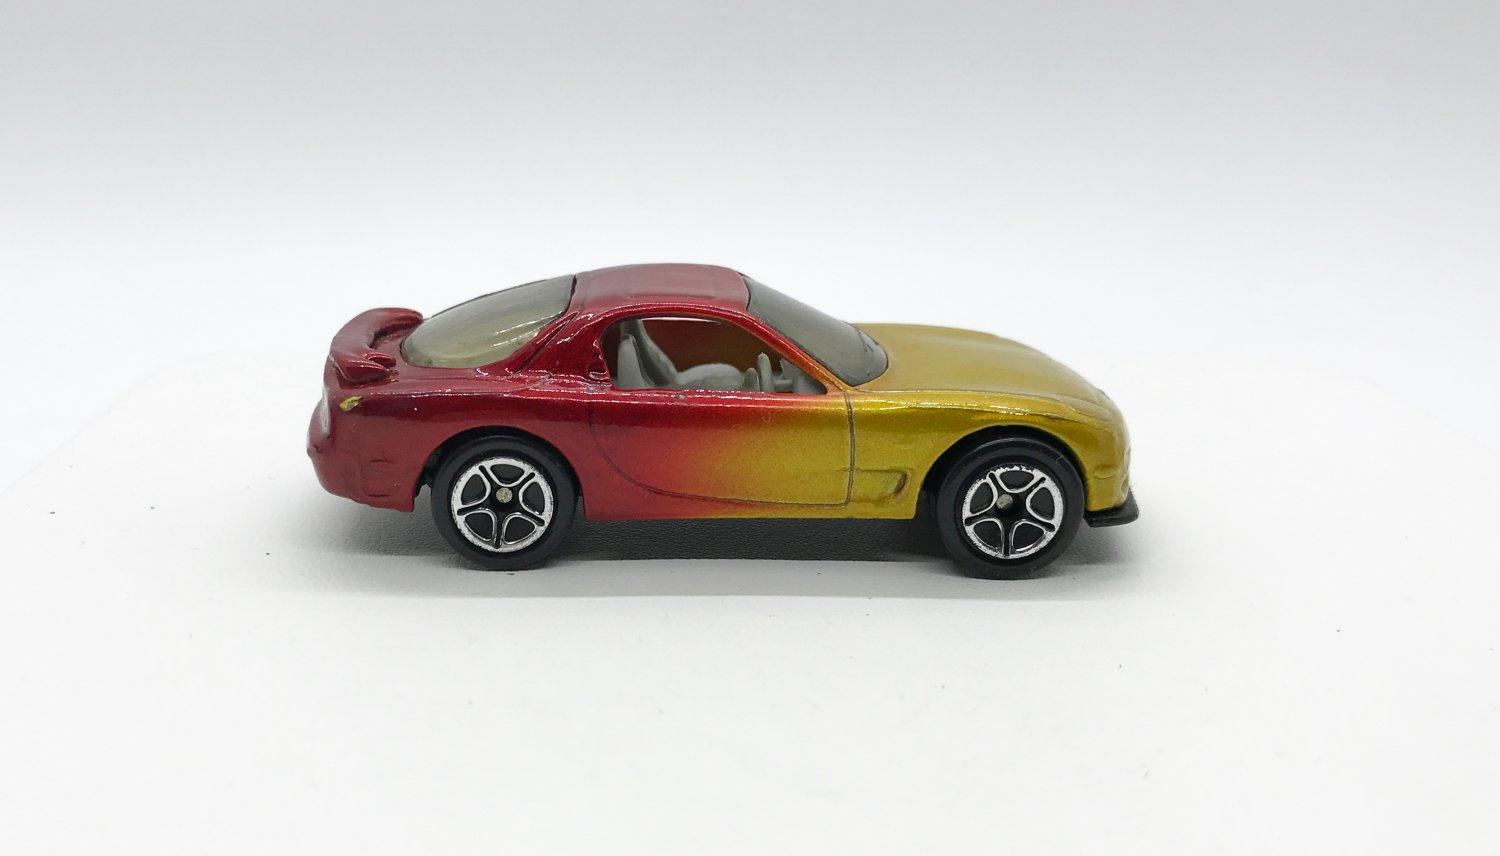 Matchbox Red and Gold Ombre Gold RX-7 (1993) - Lamoree’s Vintage